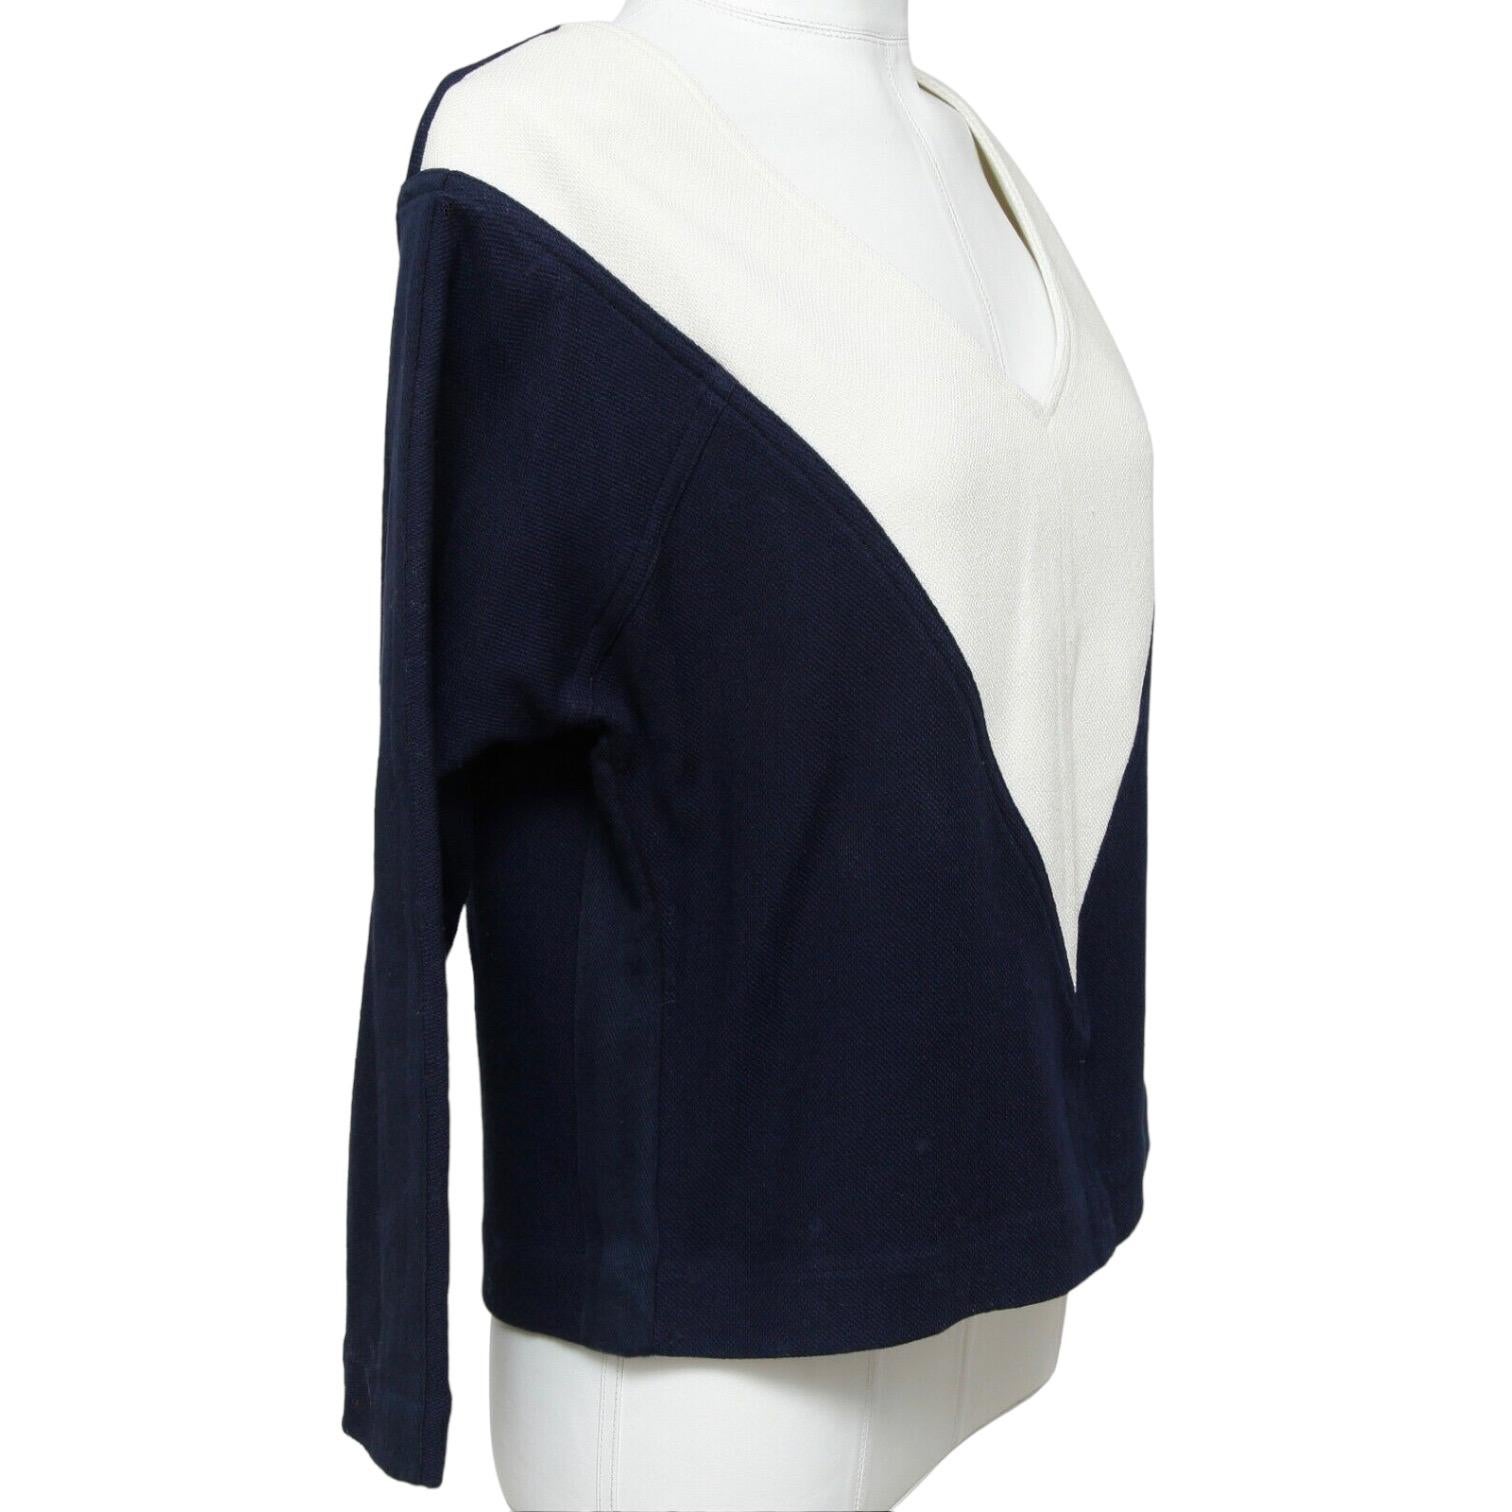 GUARANTEED AUTHENTIC CHLOE NAVY OFF WHITE COLORBLOCK TOP



Design:
- Easy fit v-neck top with a navy and off white colorblock design.
- Long sleeve.
- Slip on.

Size: S

Material: 88% Cotton, 11% Polyamide, 1% Elastane

Measurements (Approximate